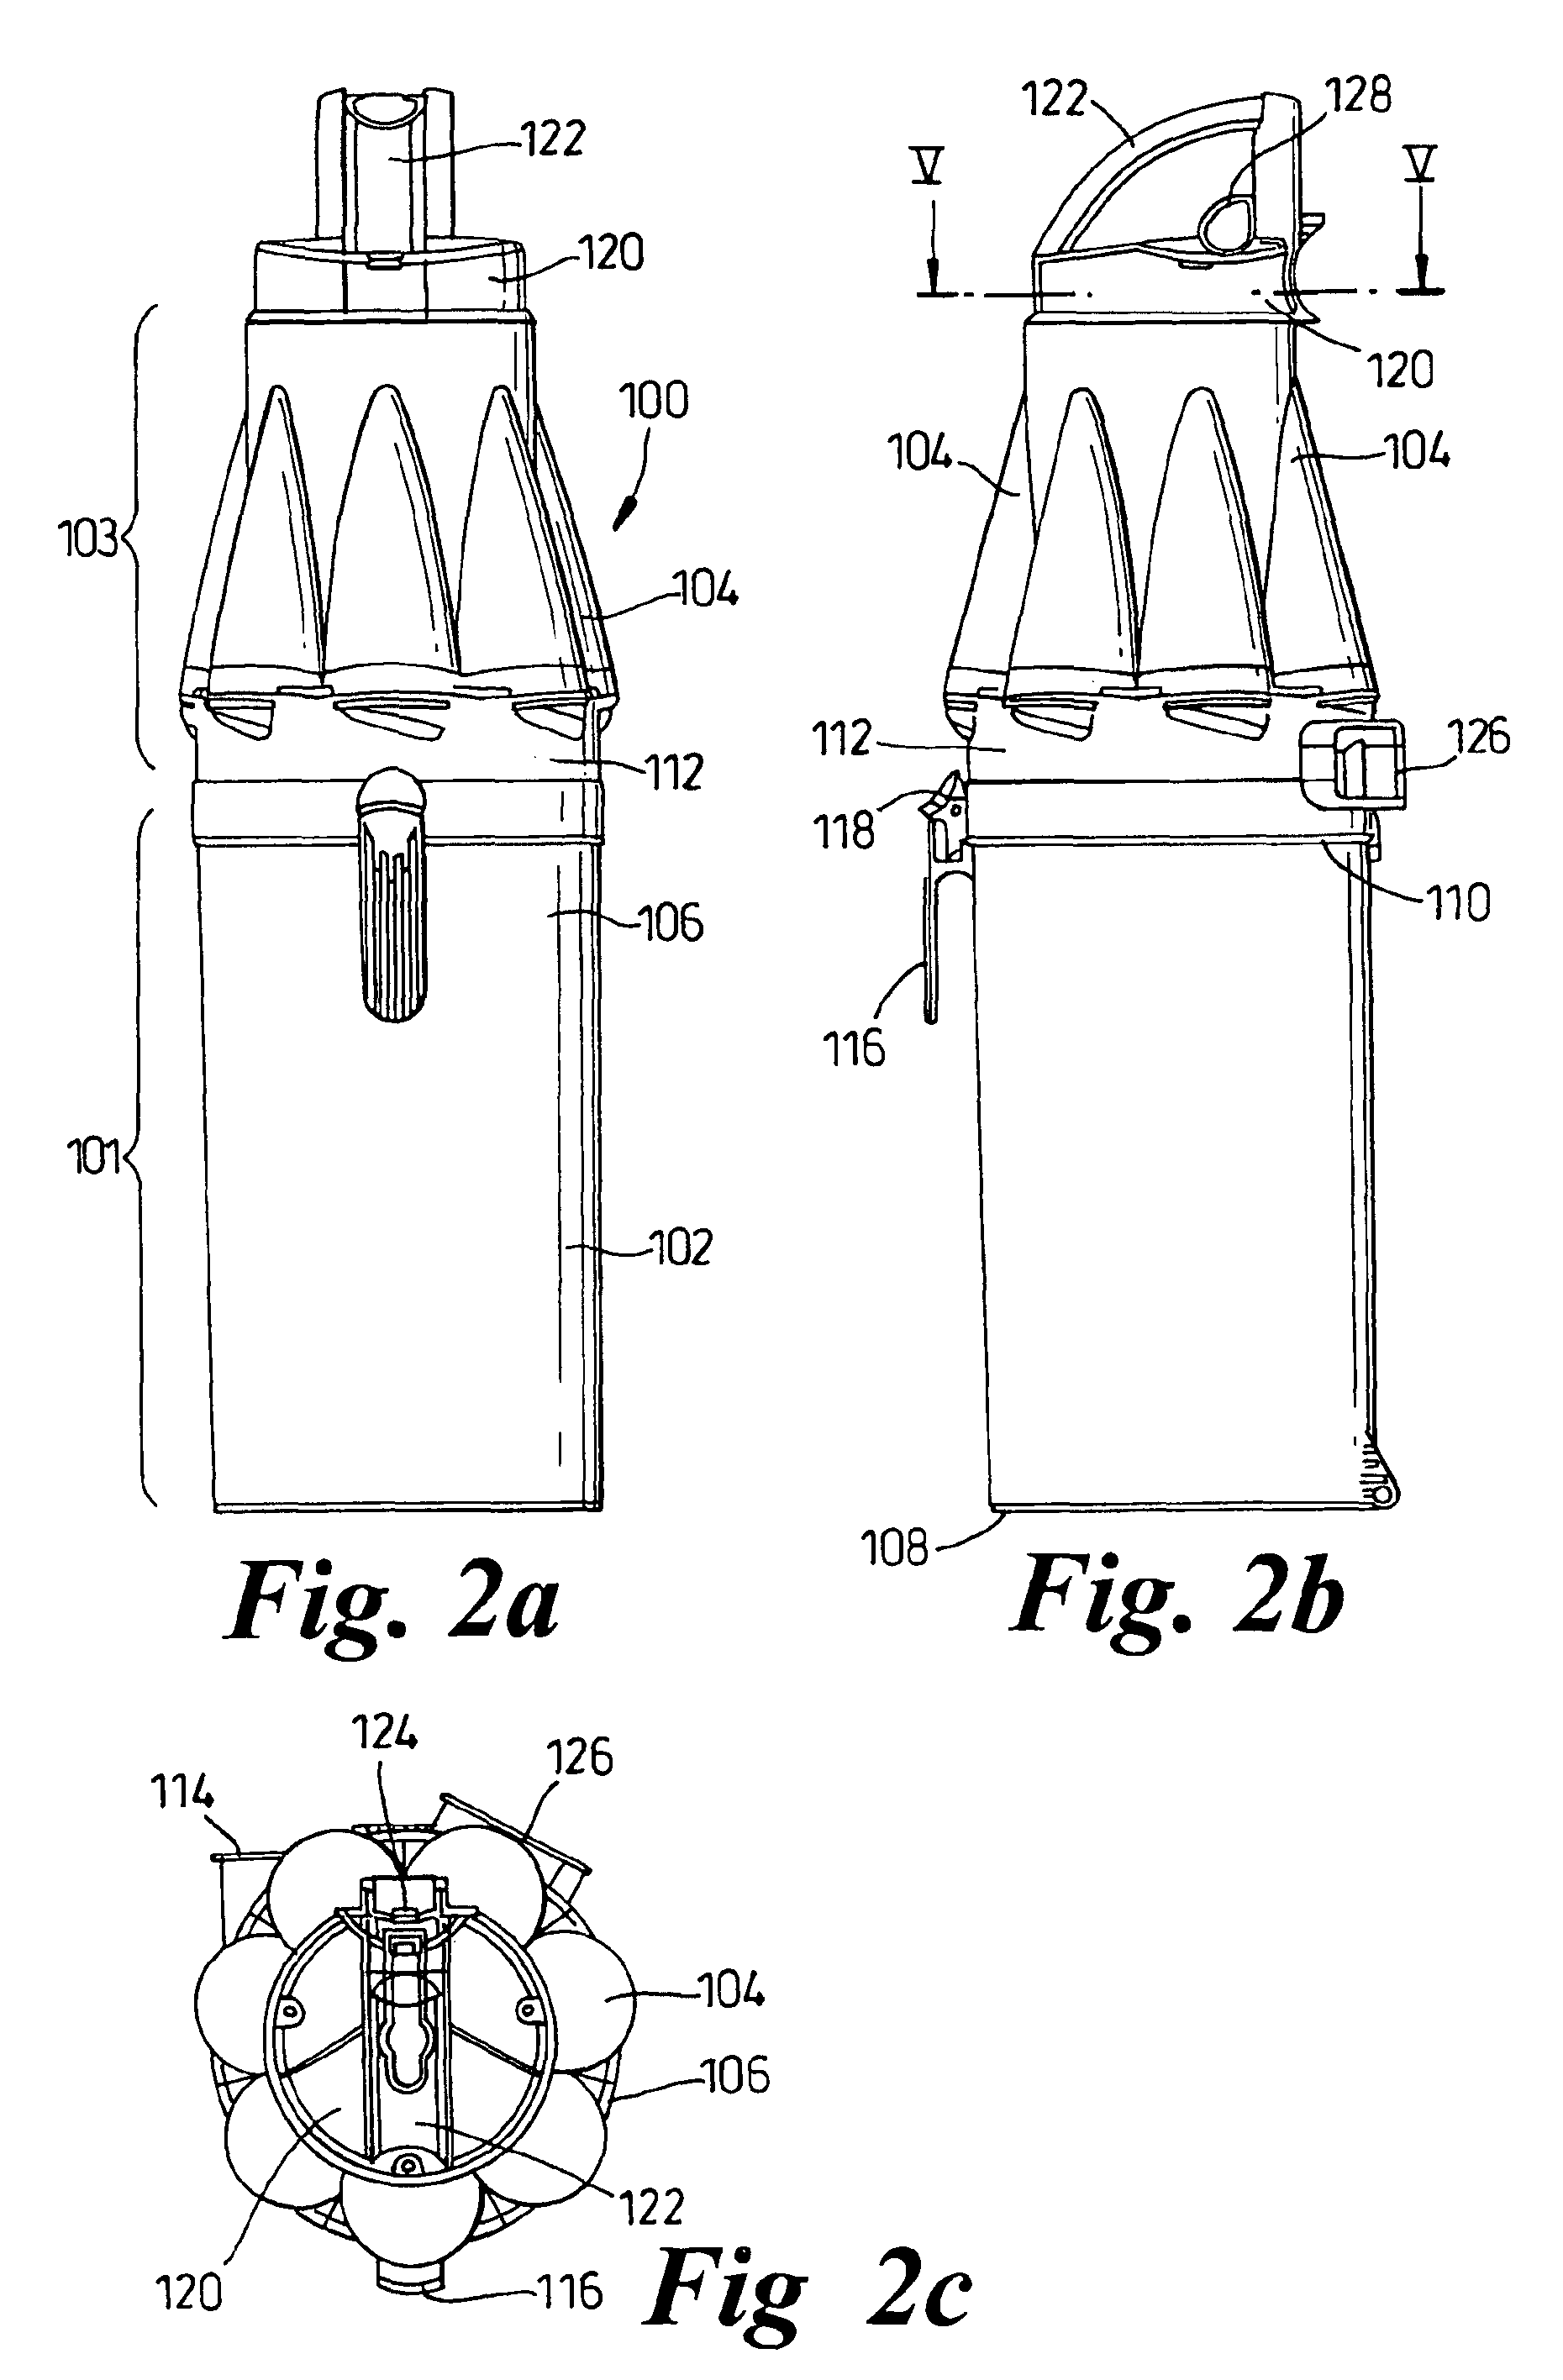 Cyclonic separating apparatus including upstream and downstream cyclone units